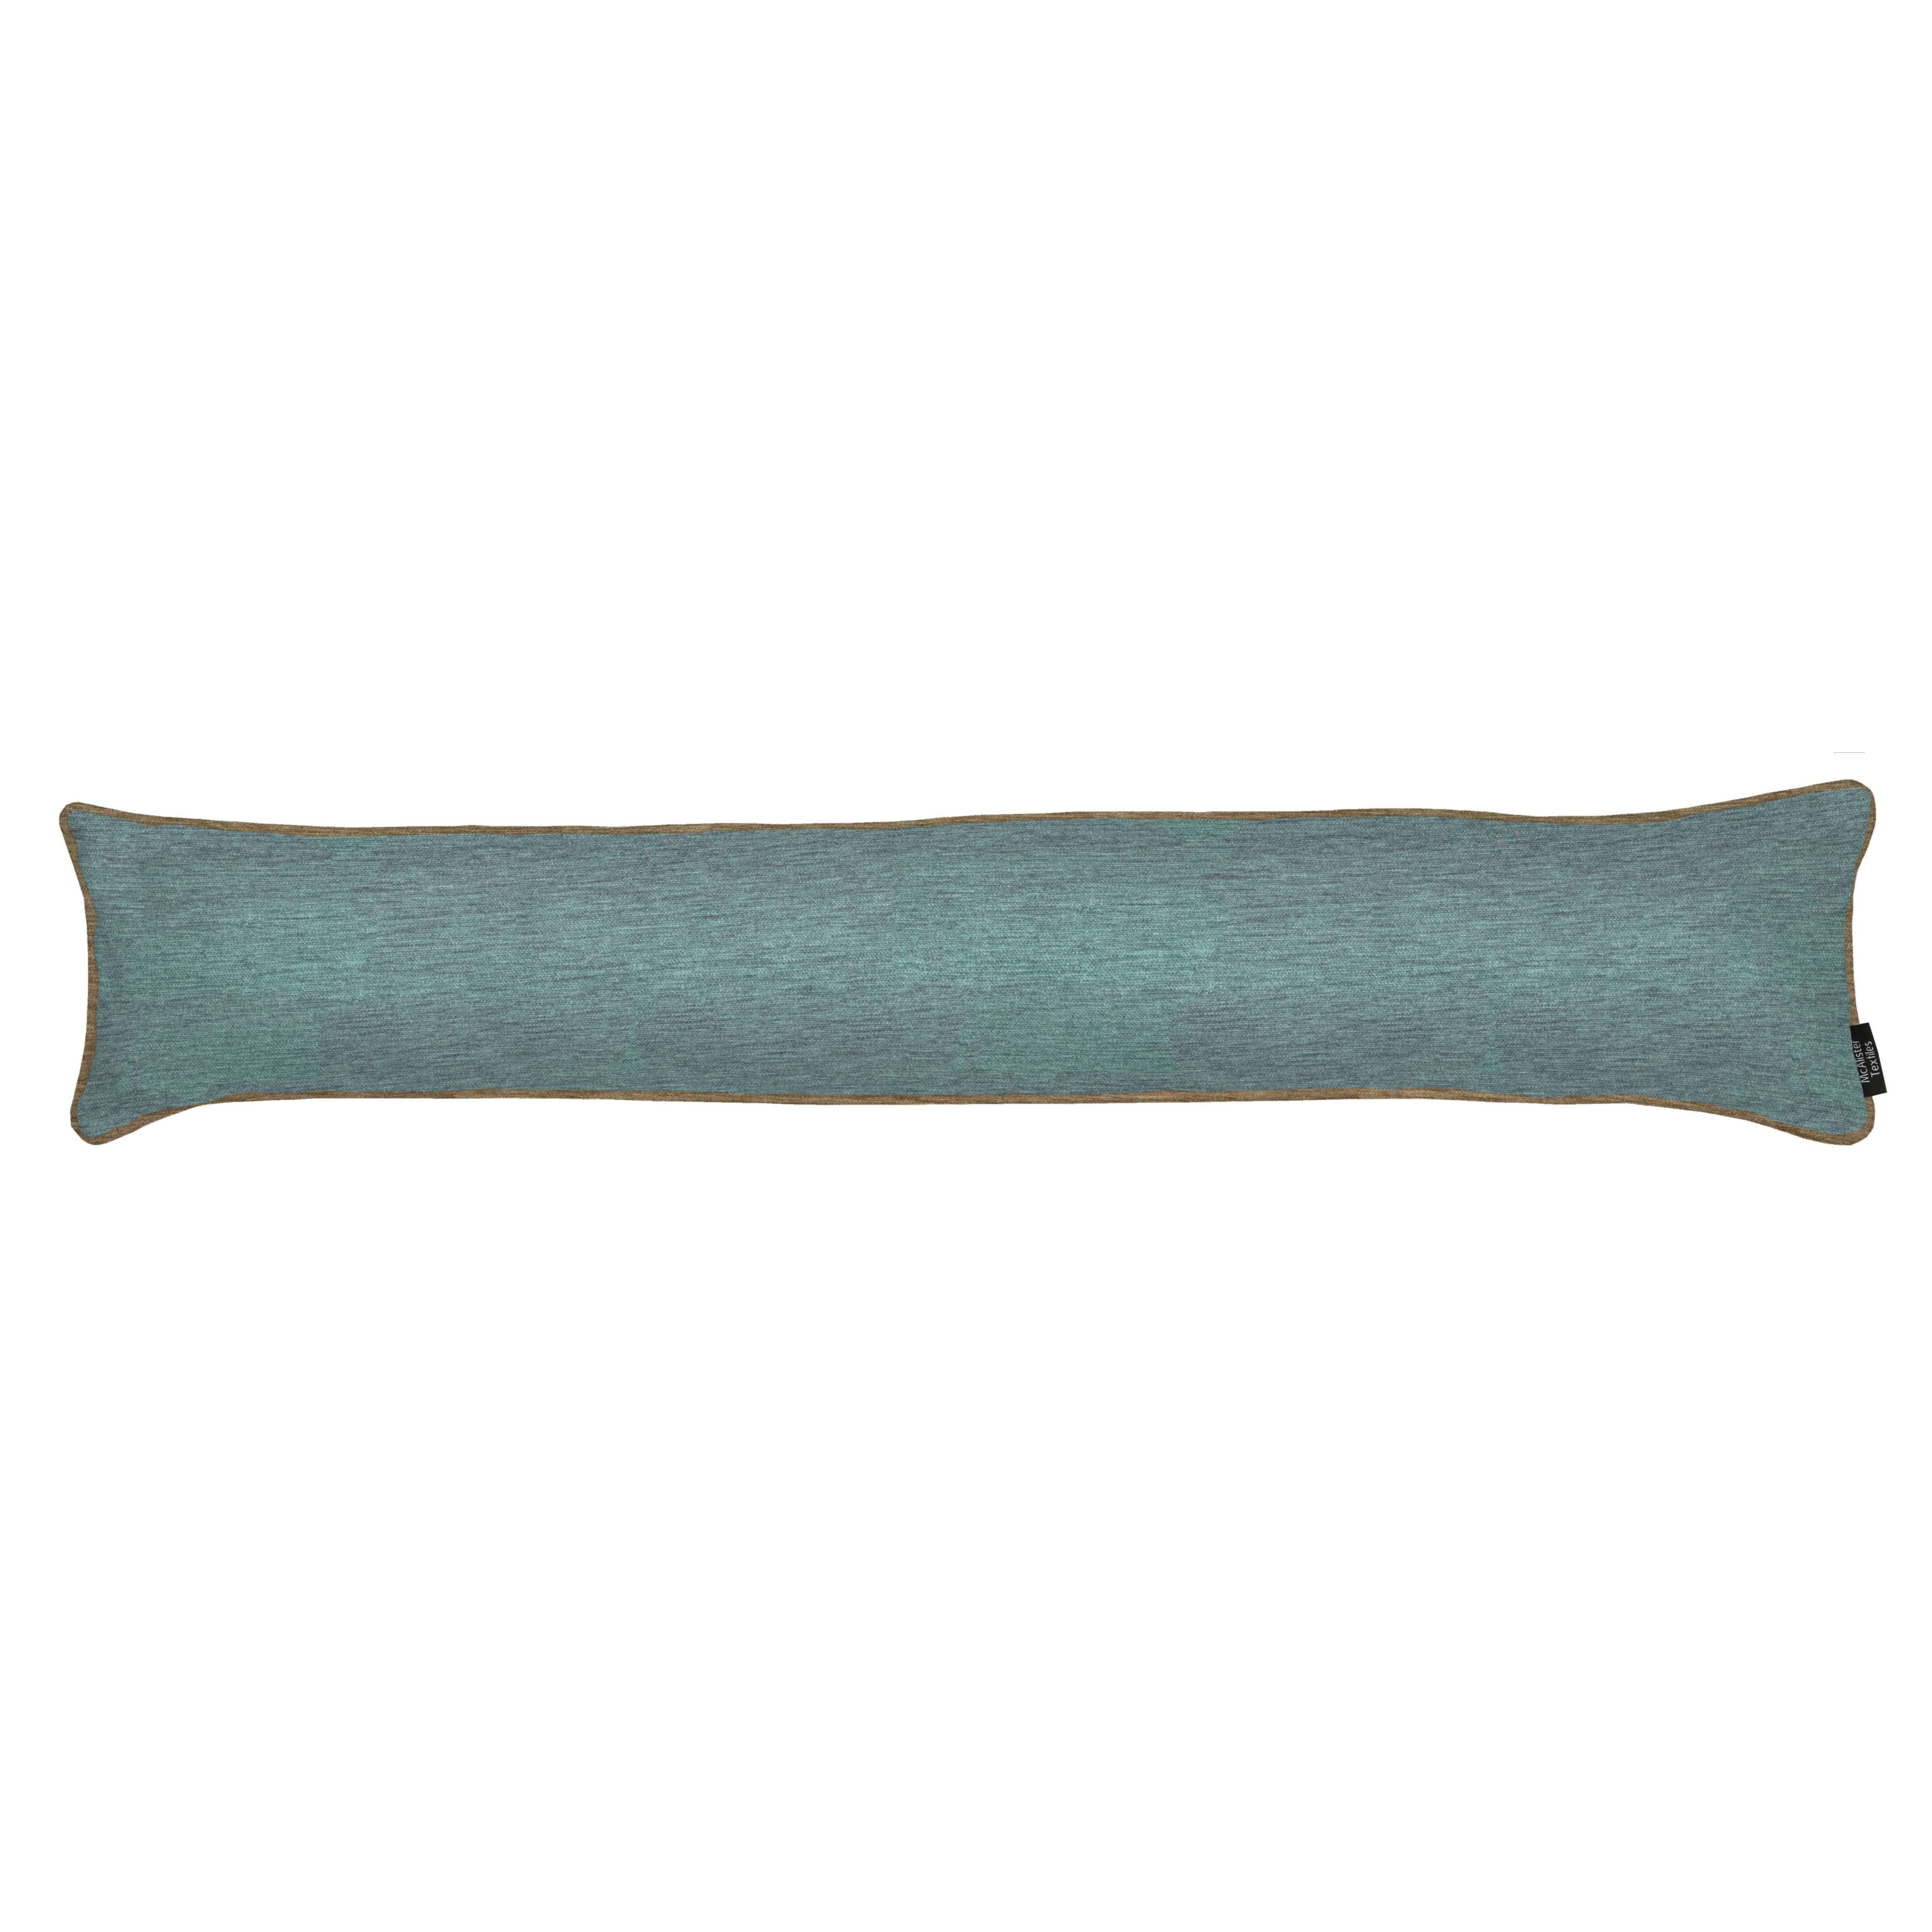 Plain Chenille Contrast Piped Blue + Beige Draught Excluder, 18cm x 80cm